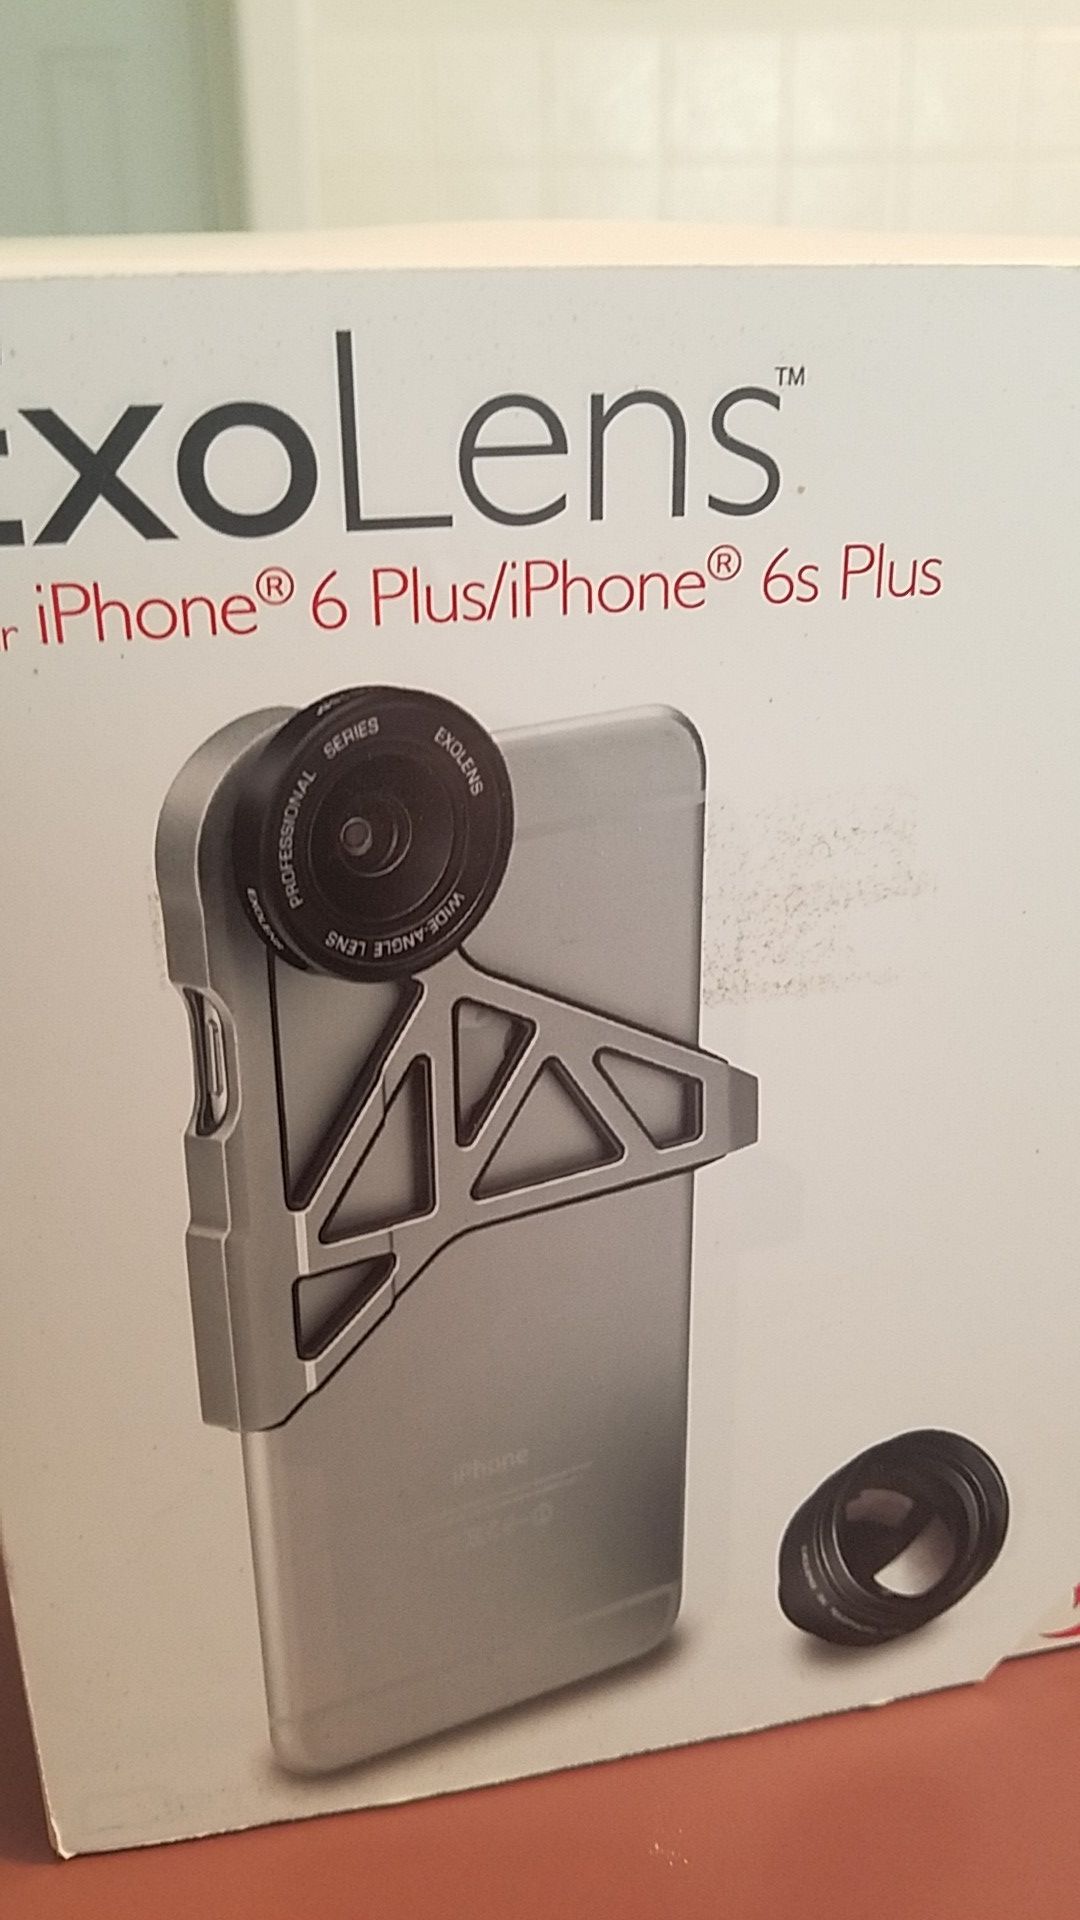 ExoLens for iPhone 6, 6s Plus